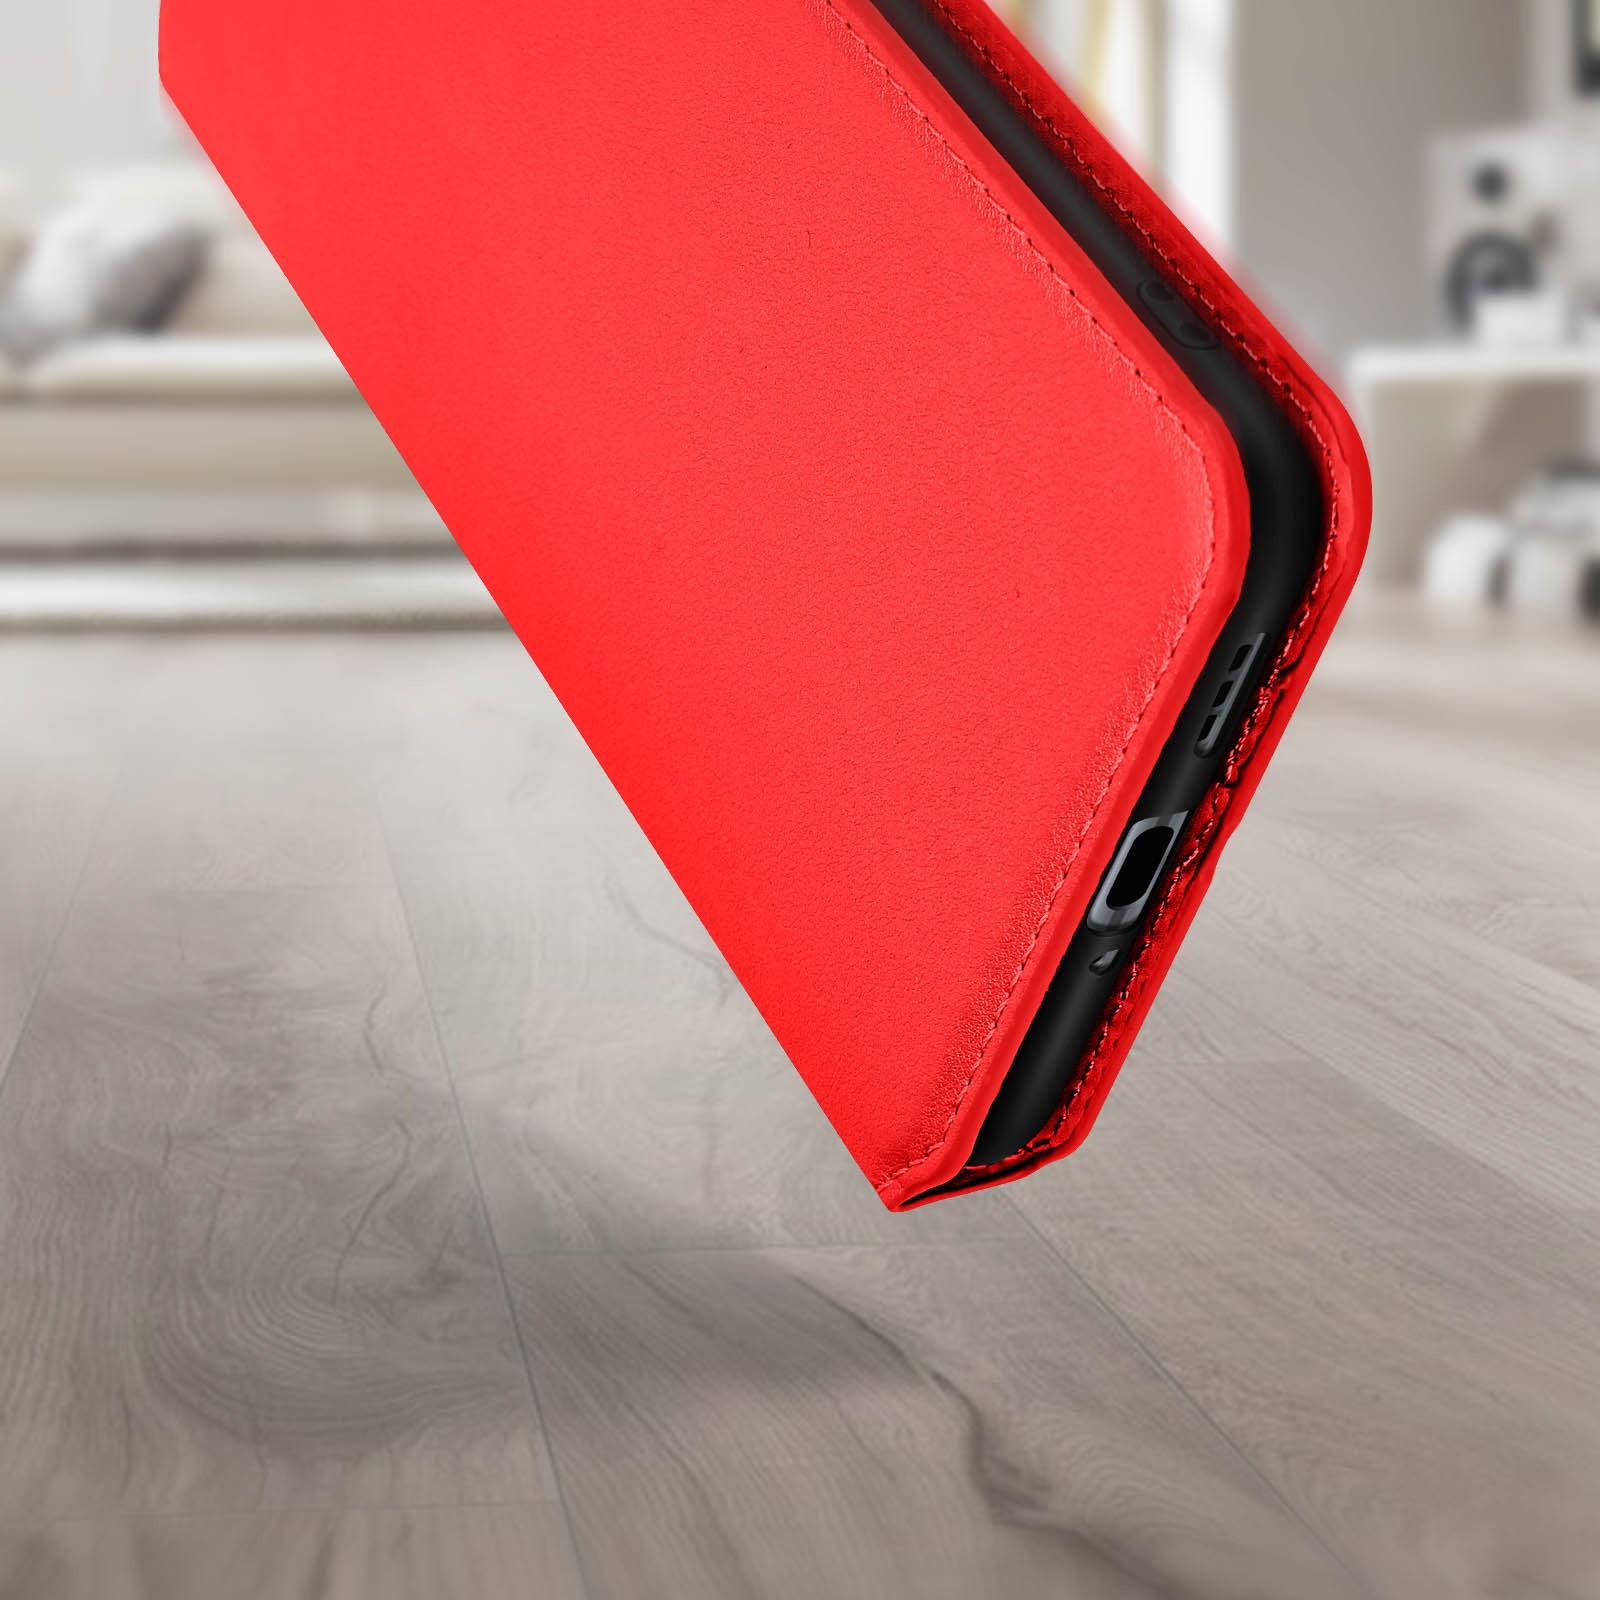 AVIZAR Oppo, Backcover Magnetklappe mit Series, Oppo X5, Find Bookcover, Rot Edition, Classic